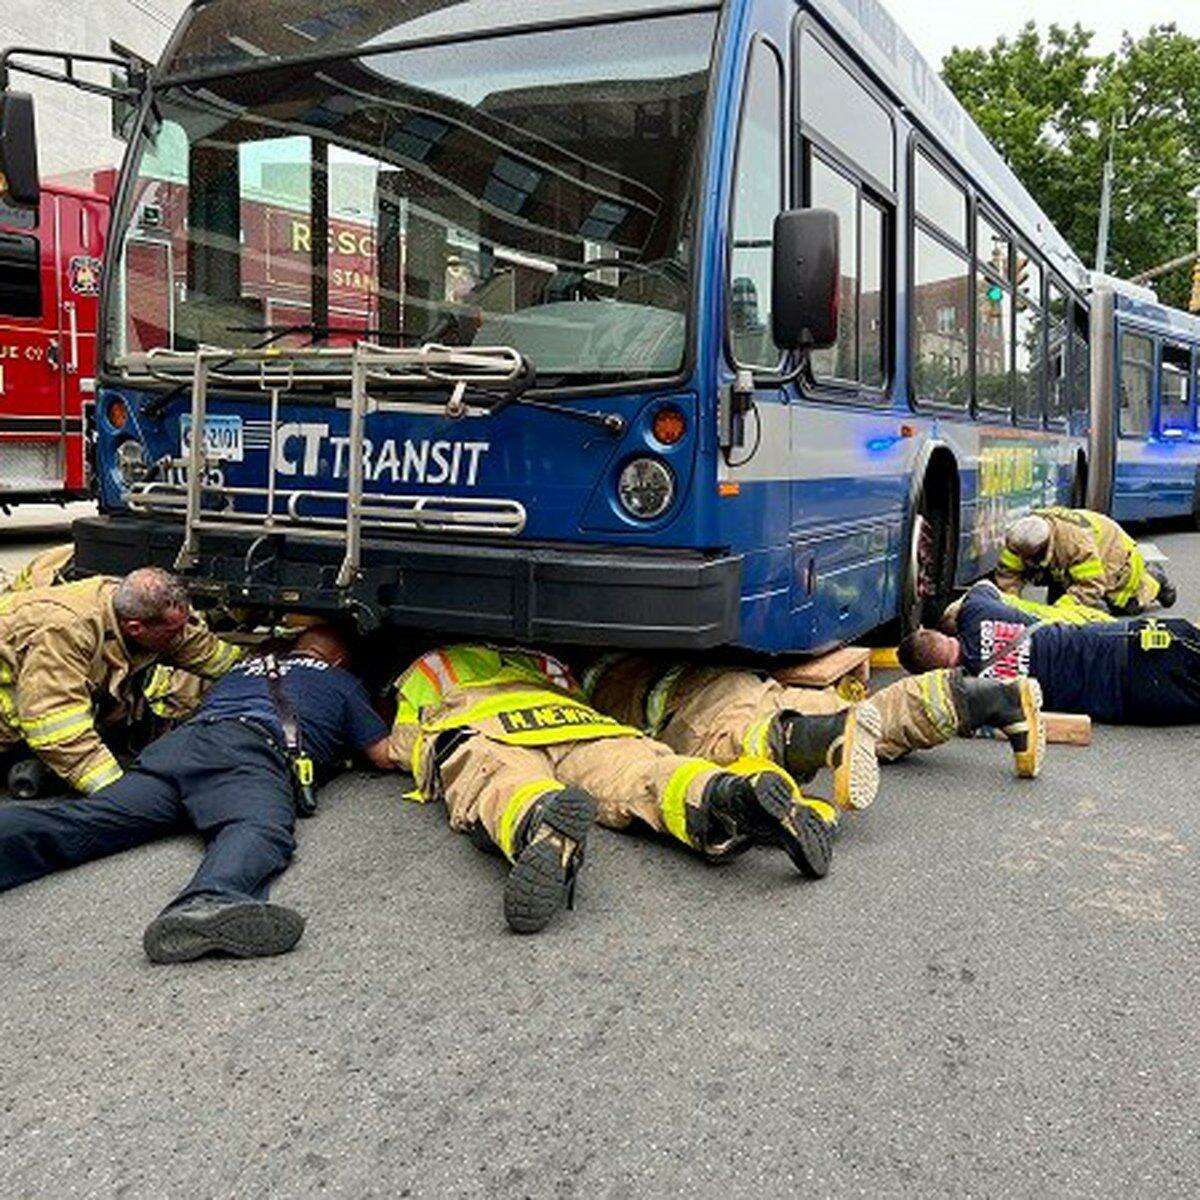 Stamford firefighters freed a woman from under a Connecticut Transit Bus at the intersection of Broad and Atlantic Streets on July 5, 2022.